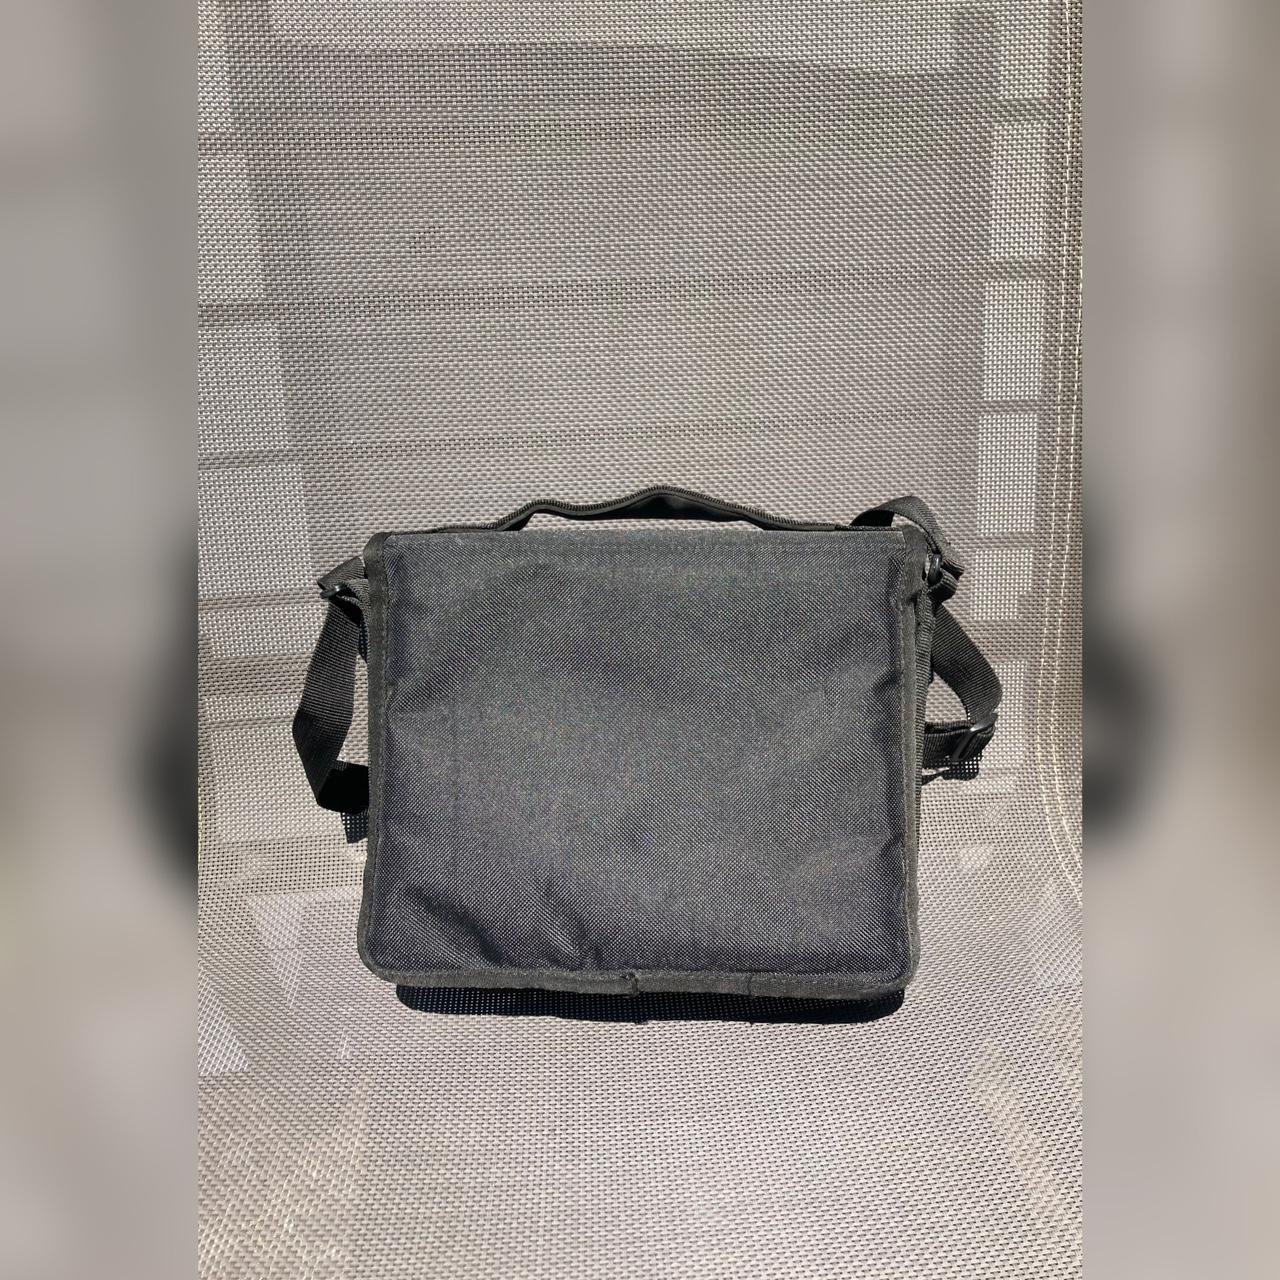 Product Image 4 - TVX Cross Body

-10/10 condition 
-light